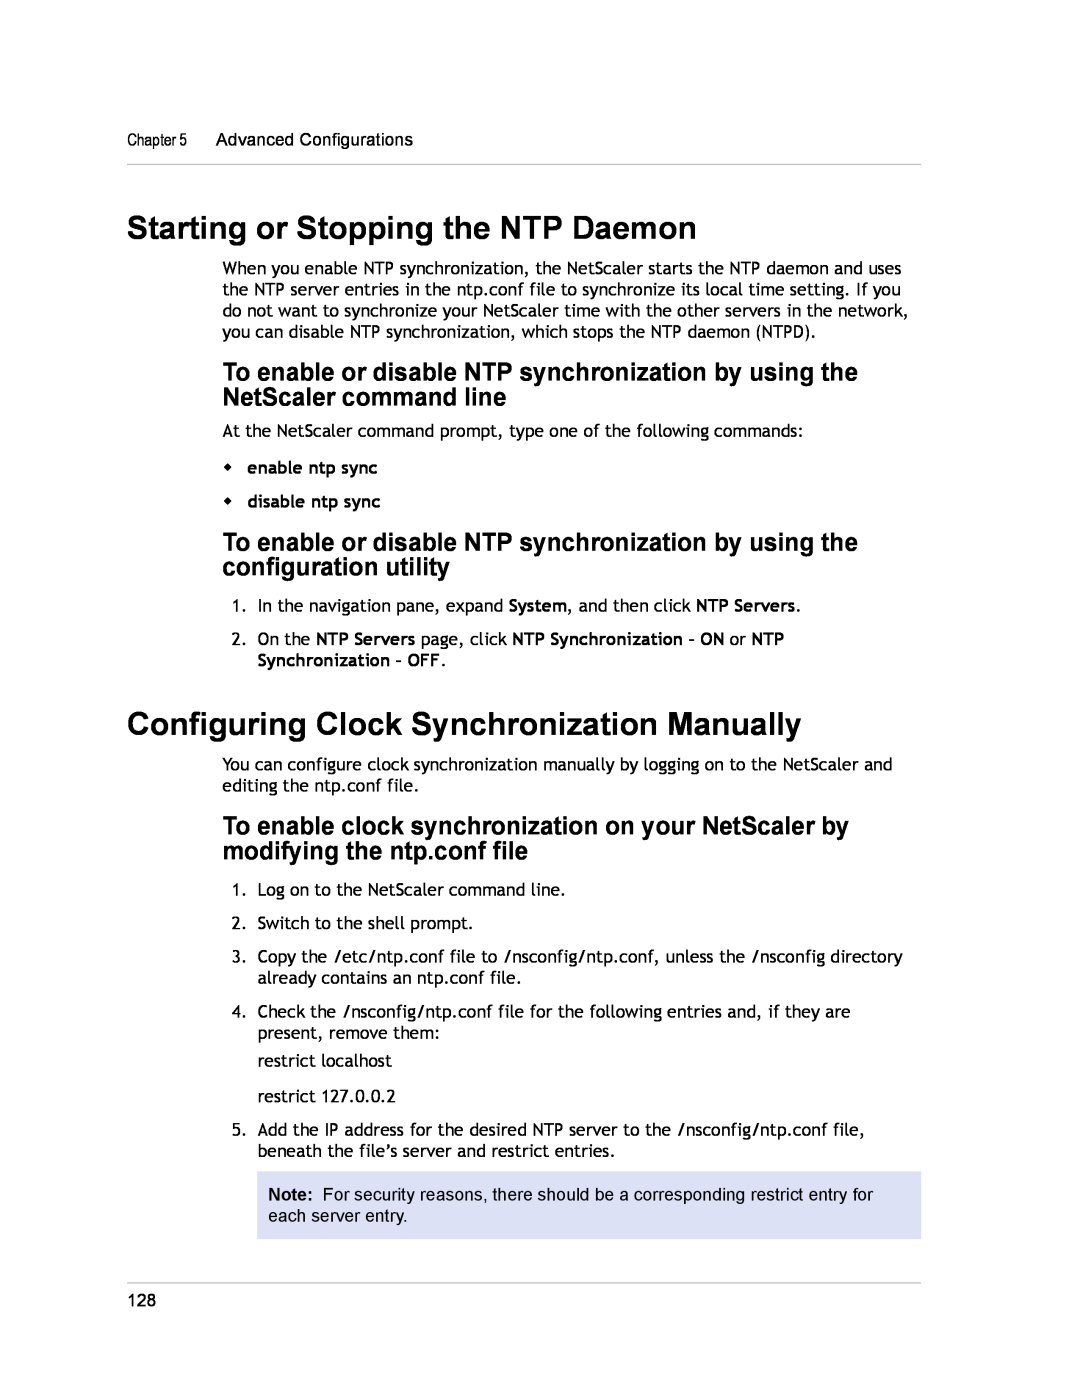 Citrix Systems CITRIX NETSCALER 9.3 manual Starting or Stopping the NTP Daemon, Configuring Clock Synchronization Manually 